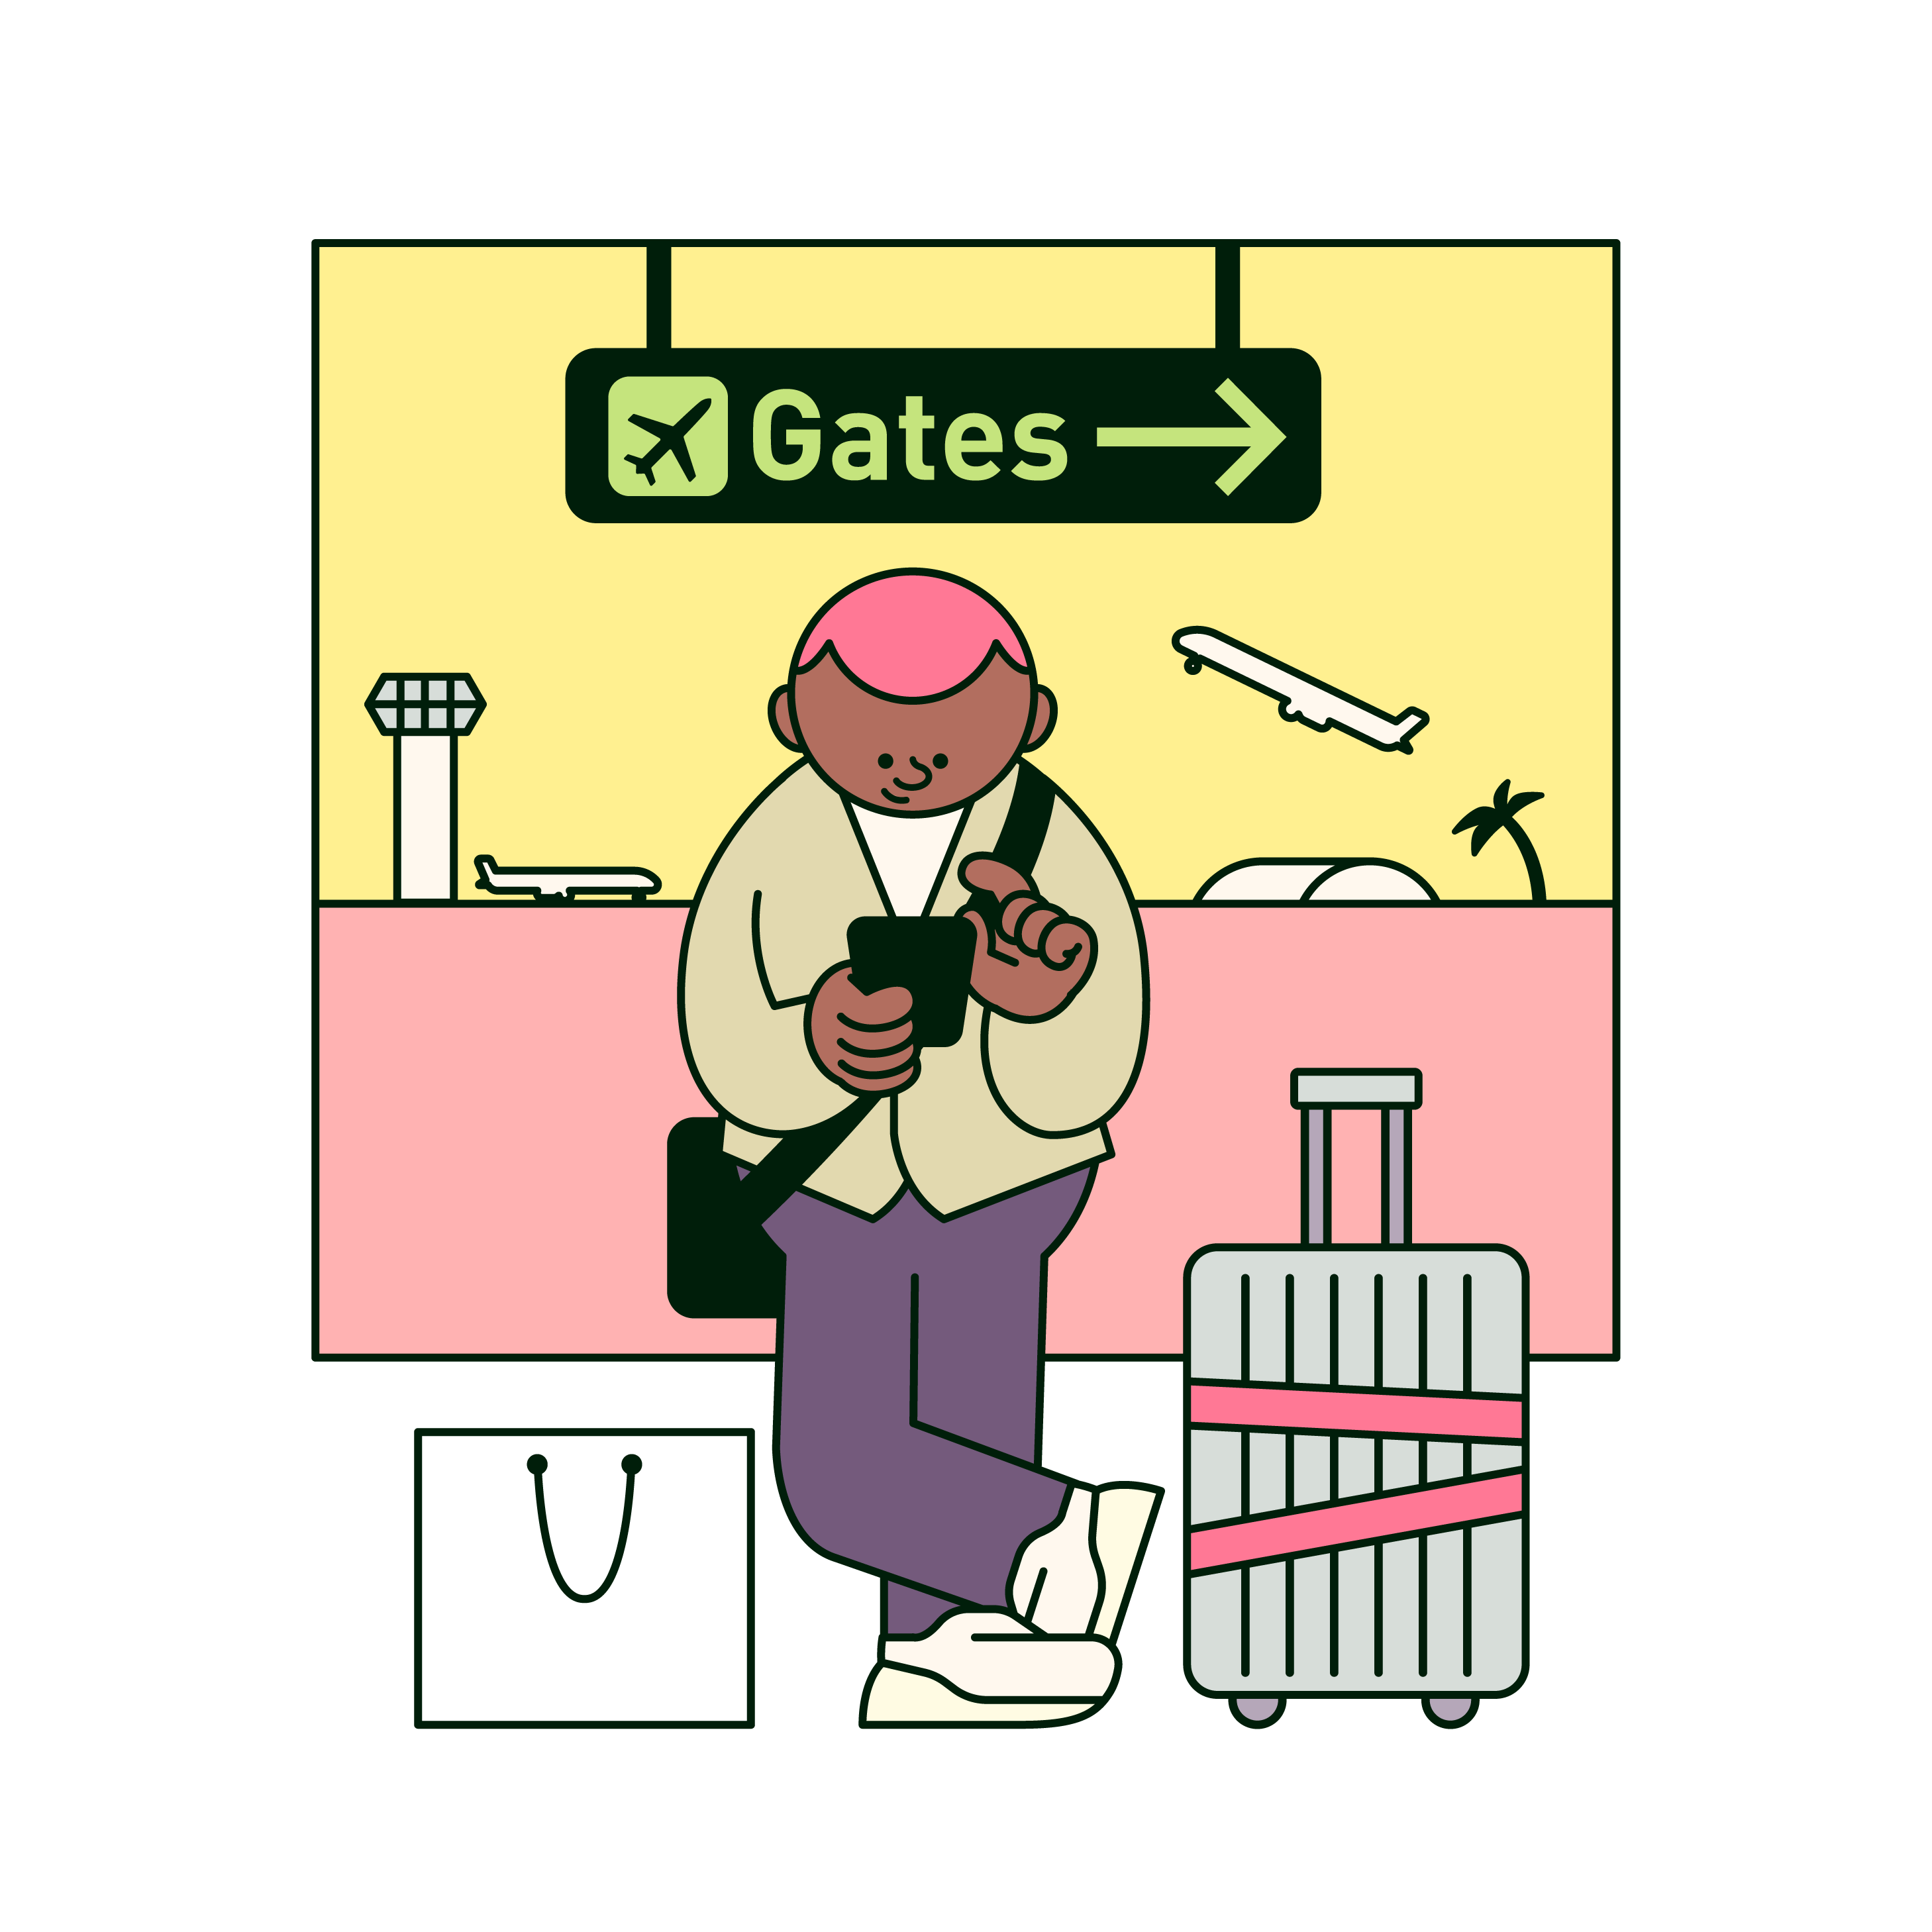 Man waiting at the airport gate with his luggage